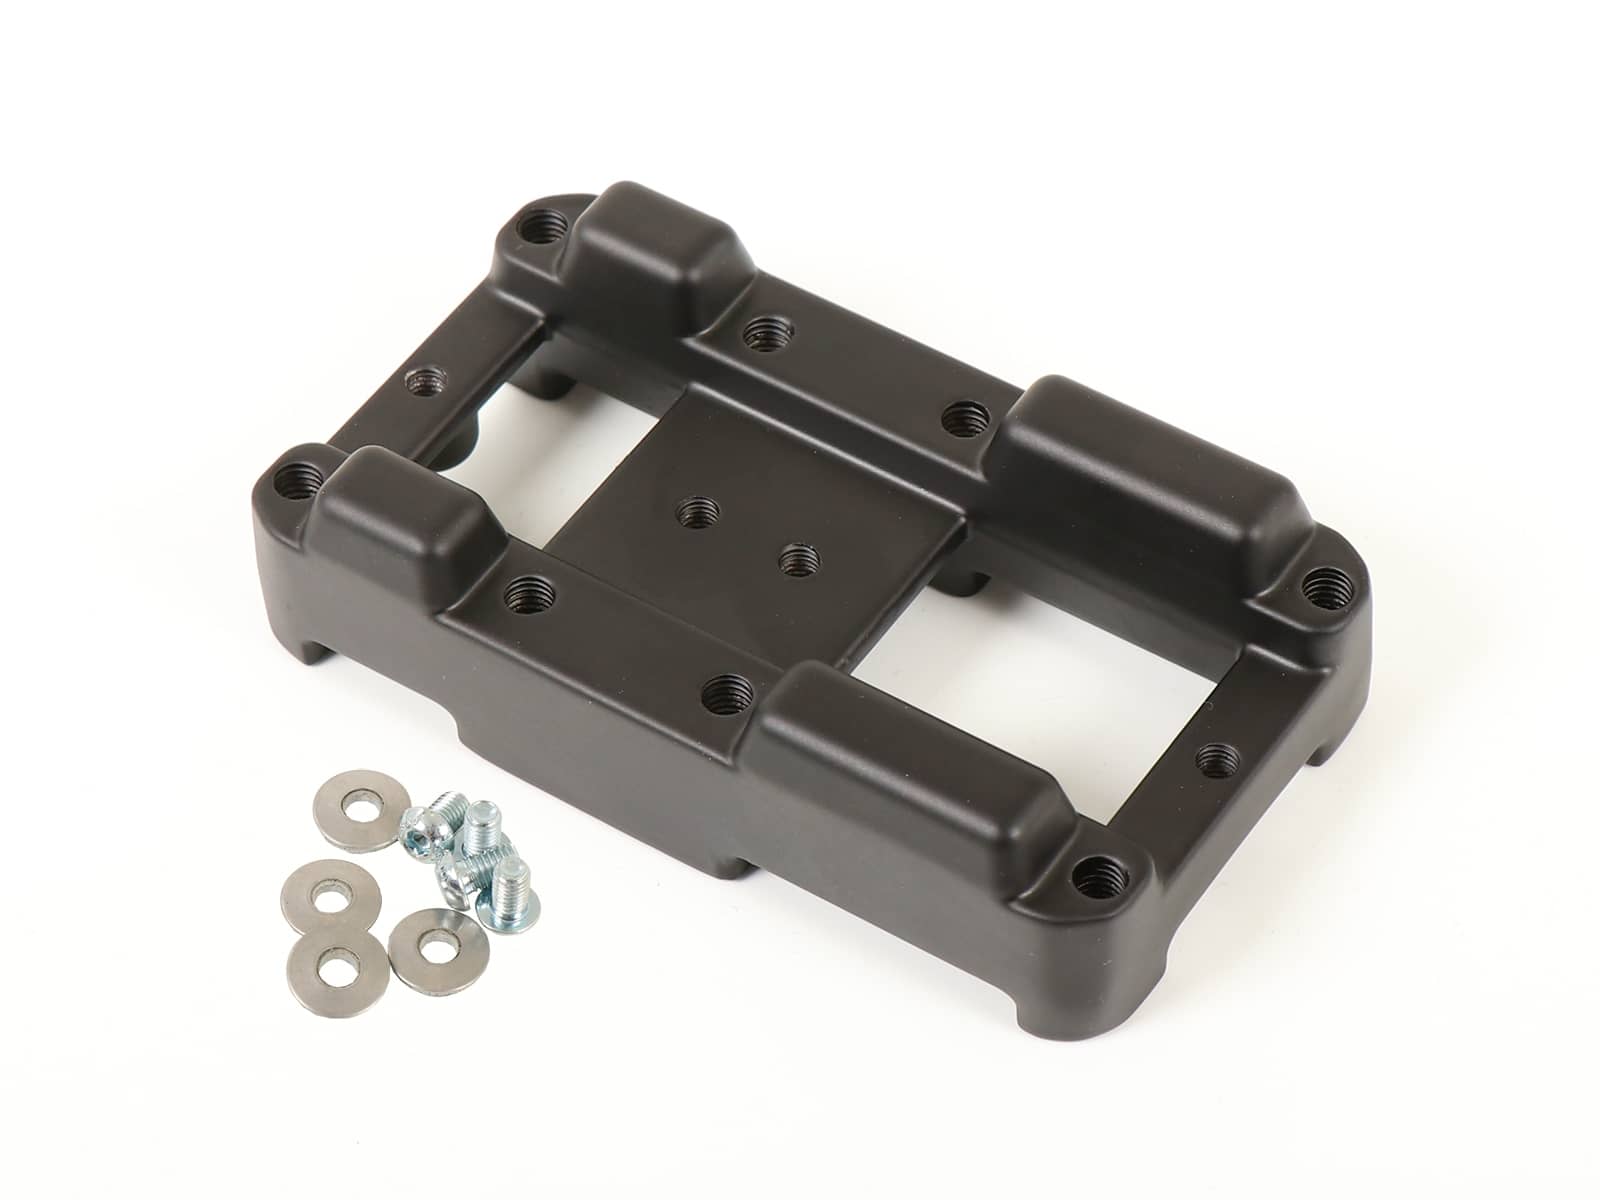 Universal mounting bracket for Xplorer boxes for fuel canister or water bottle